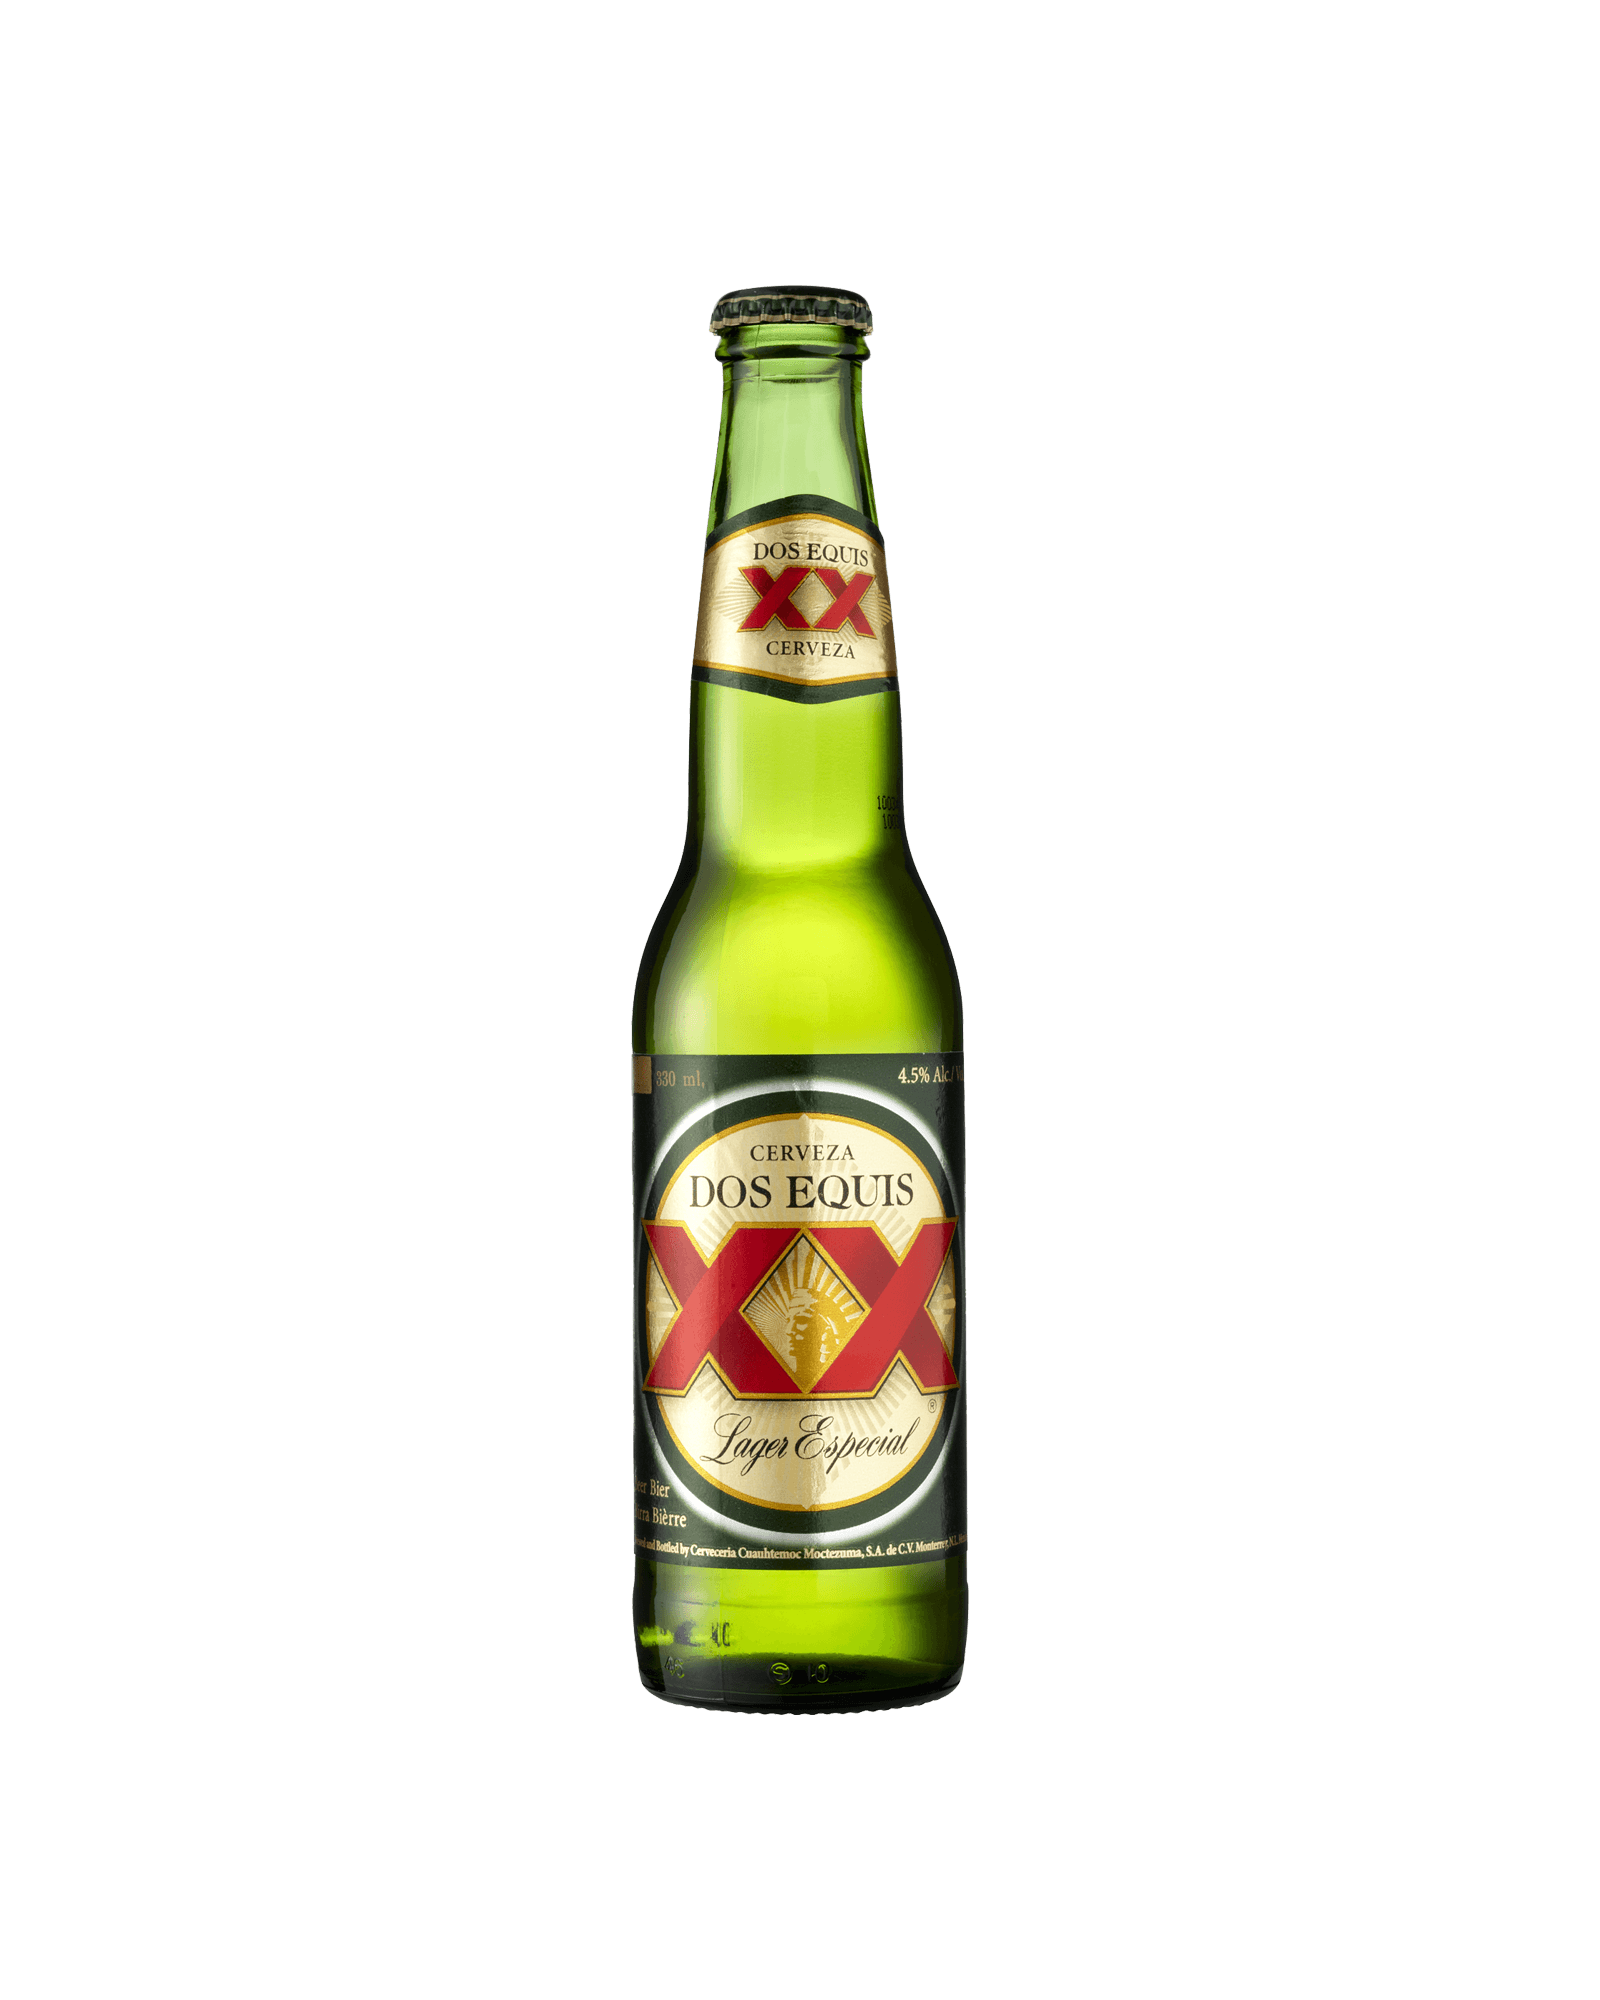 Dos Equis Lager Especial Logo - Dos Equis Lager Especial 330mL | Dan Murphy's | Buy Wine, Champagne ...